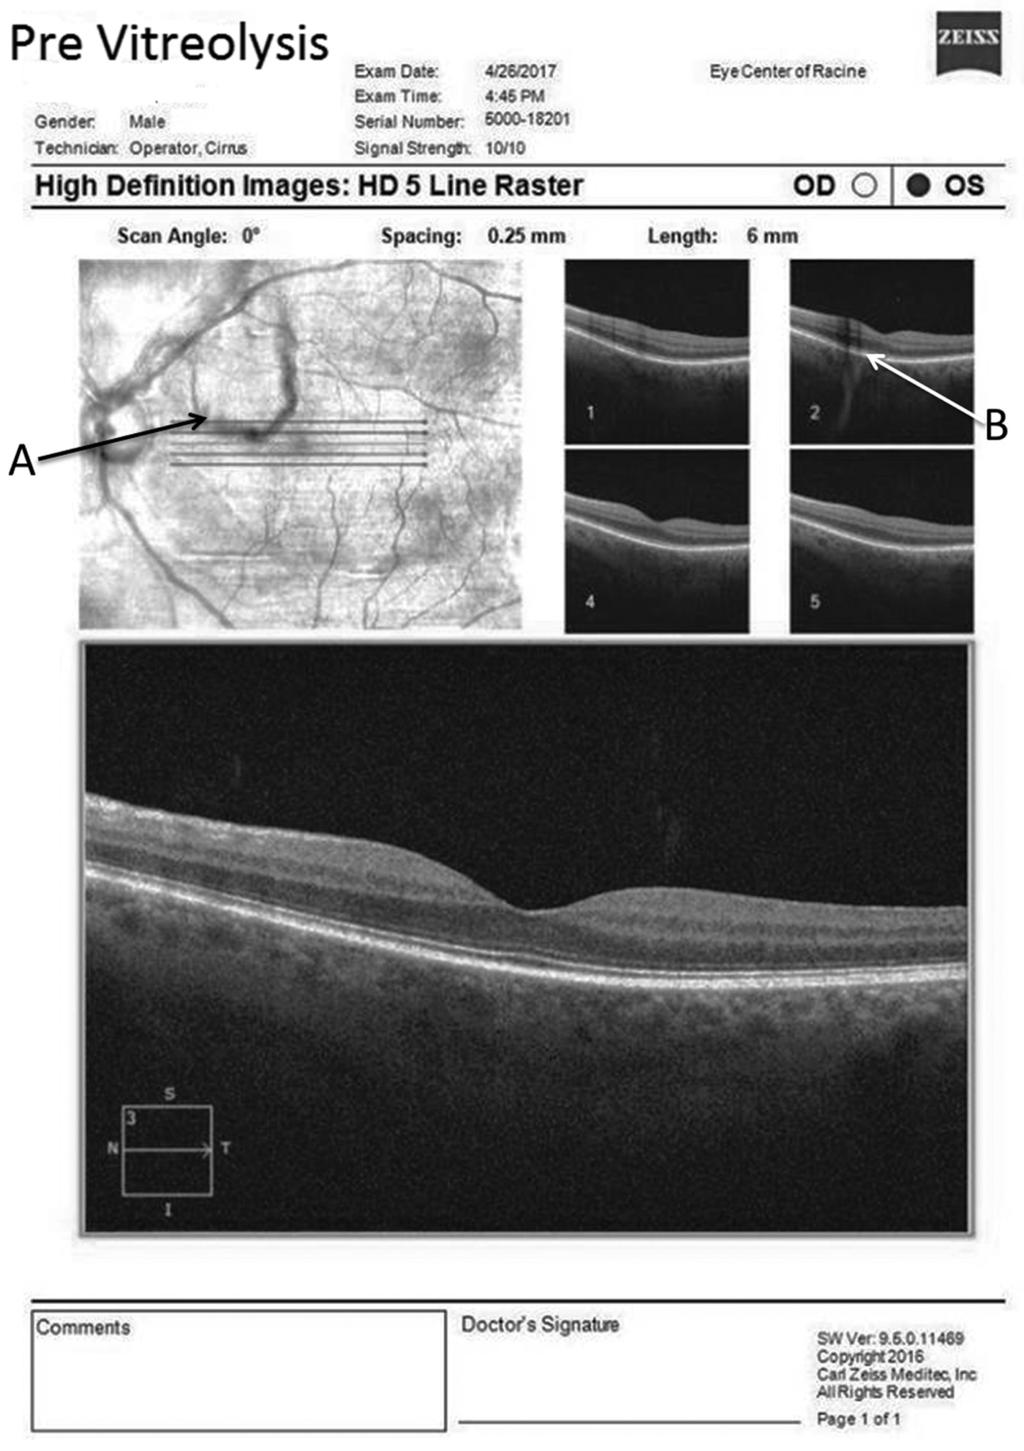 Figure 1. Pre-vitreolysis, patient reported distortion and shadow in central vision. (A) Floater over the macula. (B) Shadow cast from the floater.